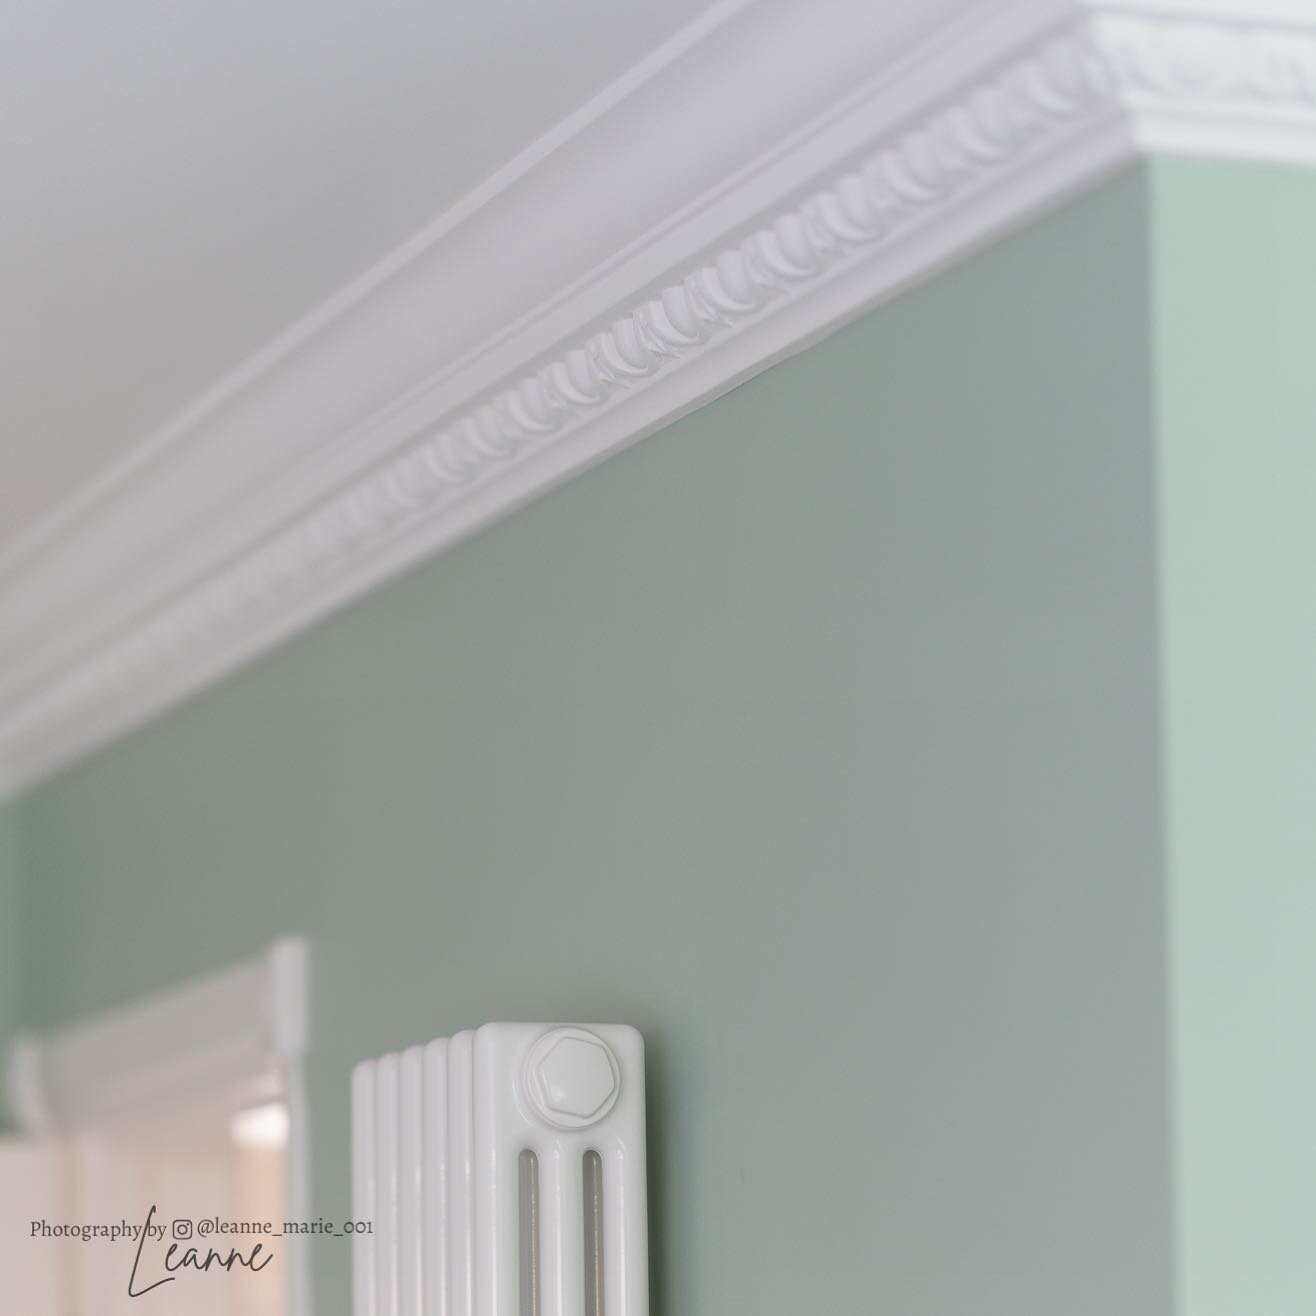 Look at this beautiful decorative coving.

What is coving and why do people have it?

Coving, also known as crown moulding or cornice moulding, is a decorative element used to finish the transition between the ceiling and wall in interior spaces. It 